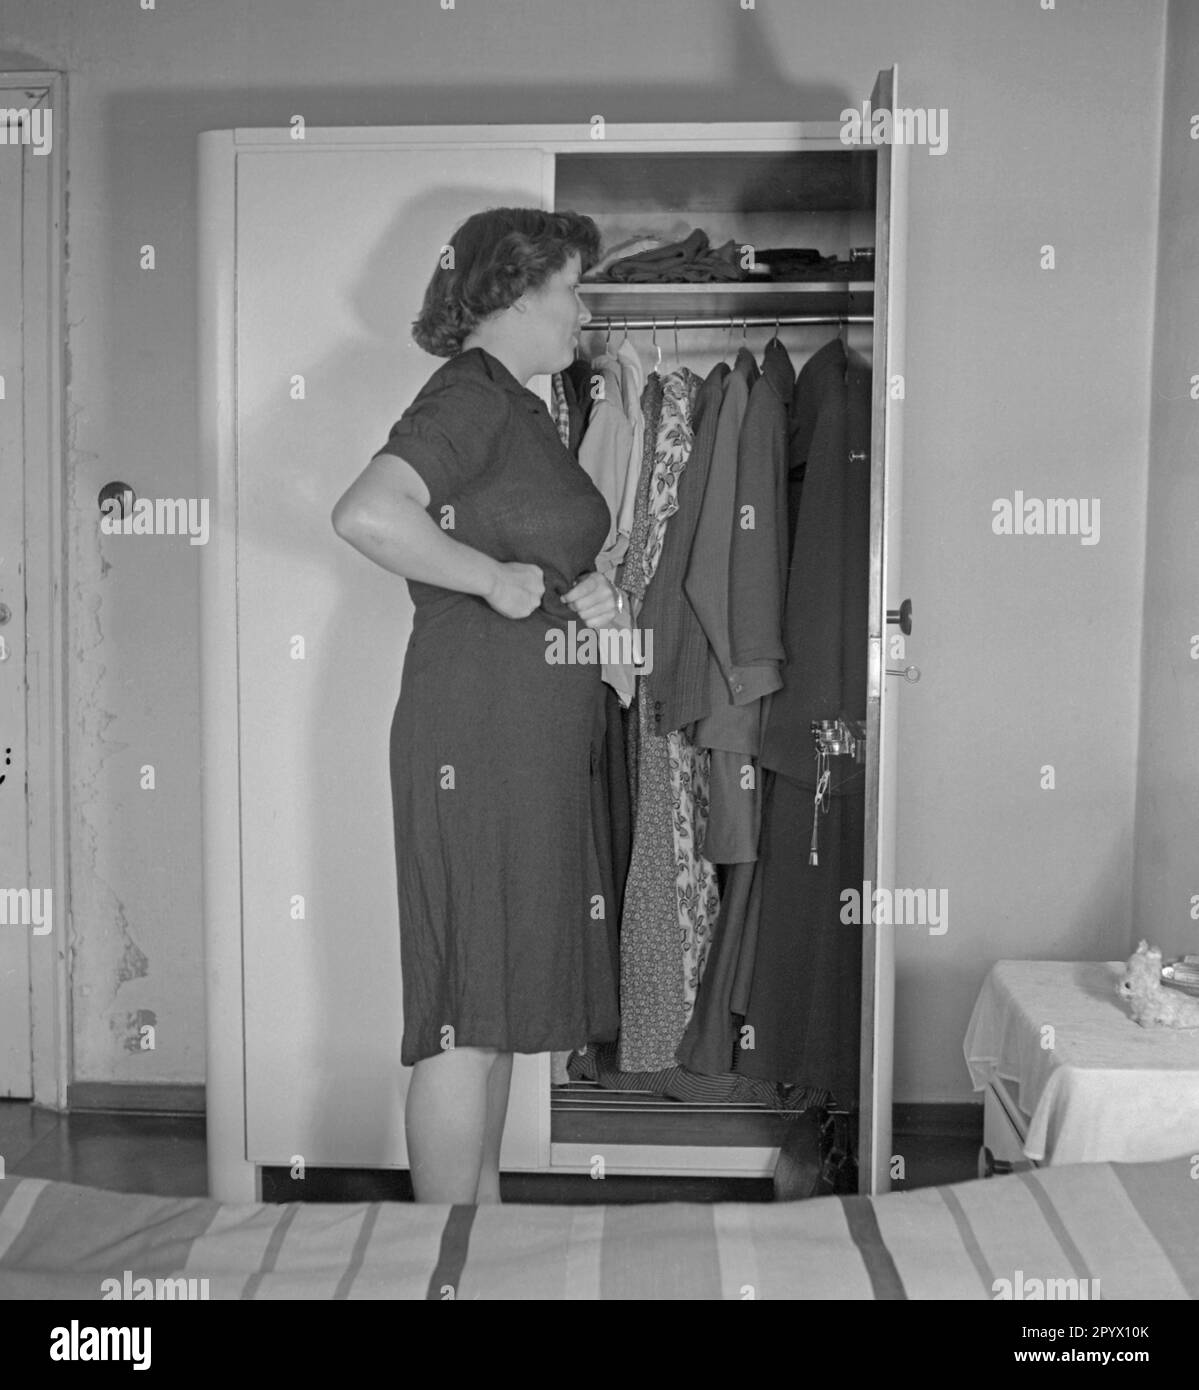 A woman stands in front of an open wardrobe in a bedroom and examines herself in the mirror of the closet door, while touches her waist with her hands. Stock Photo